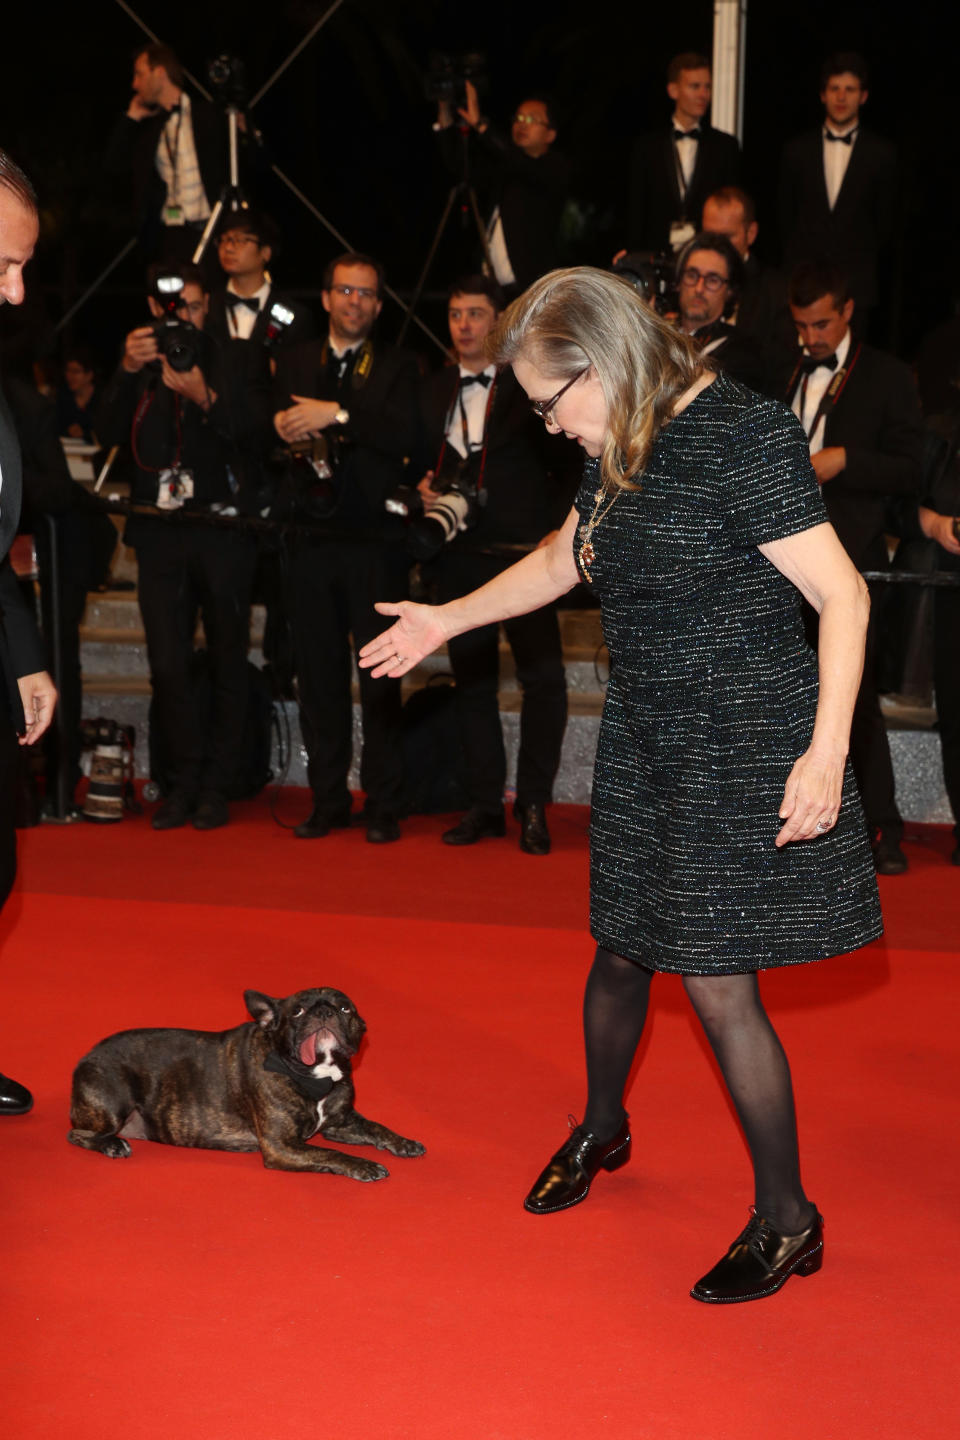 Carrie Fisher and her dog Gary attends 'The Handmaiden (Mademoiselle)' premiere during the 69th annual Cannes Film Festival in 2016.